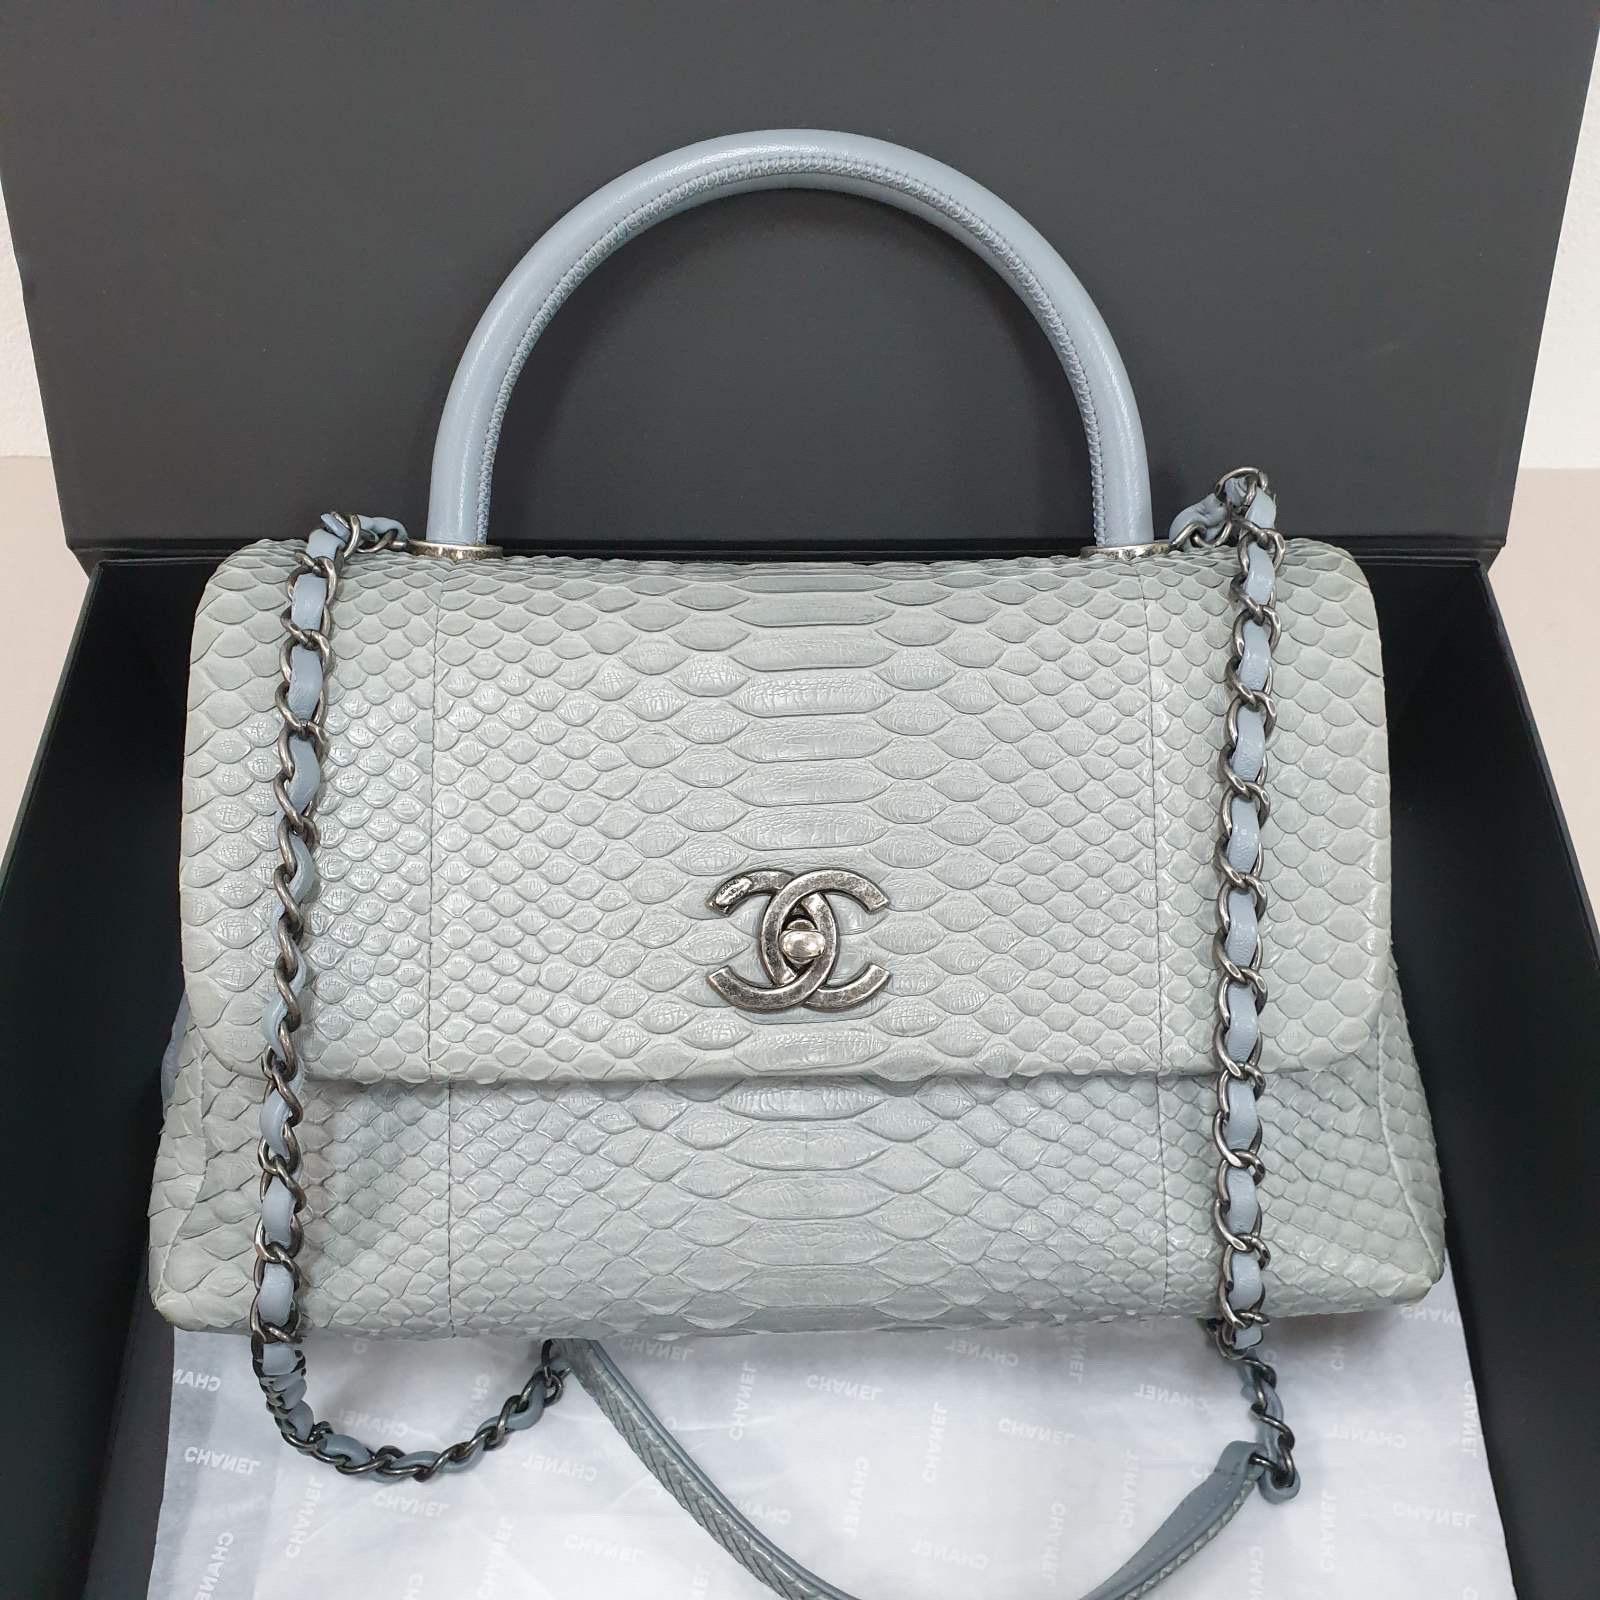 This is an authentic CHANEL Python Coco Handle Flap in Gray Blue.
This sleek classic tote is crafted of gray blue python skin.
The shoulder bag features a light blue lambskin top handle, a rear patch pocket, a leather threaded ruthenium shoulder